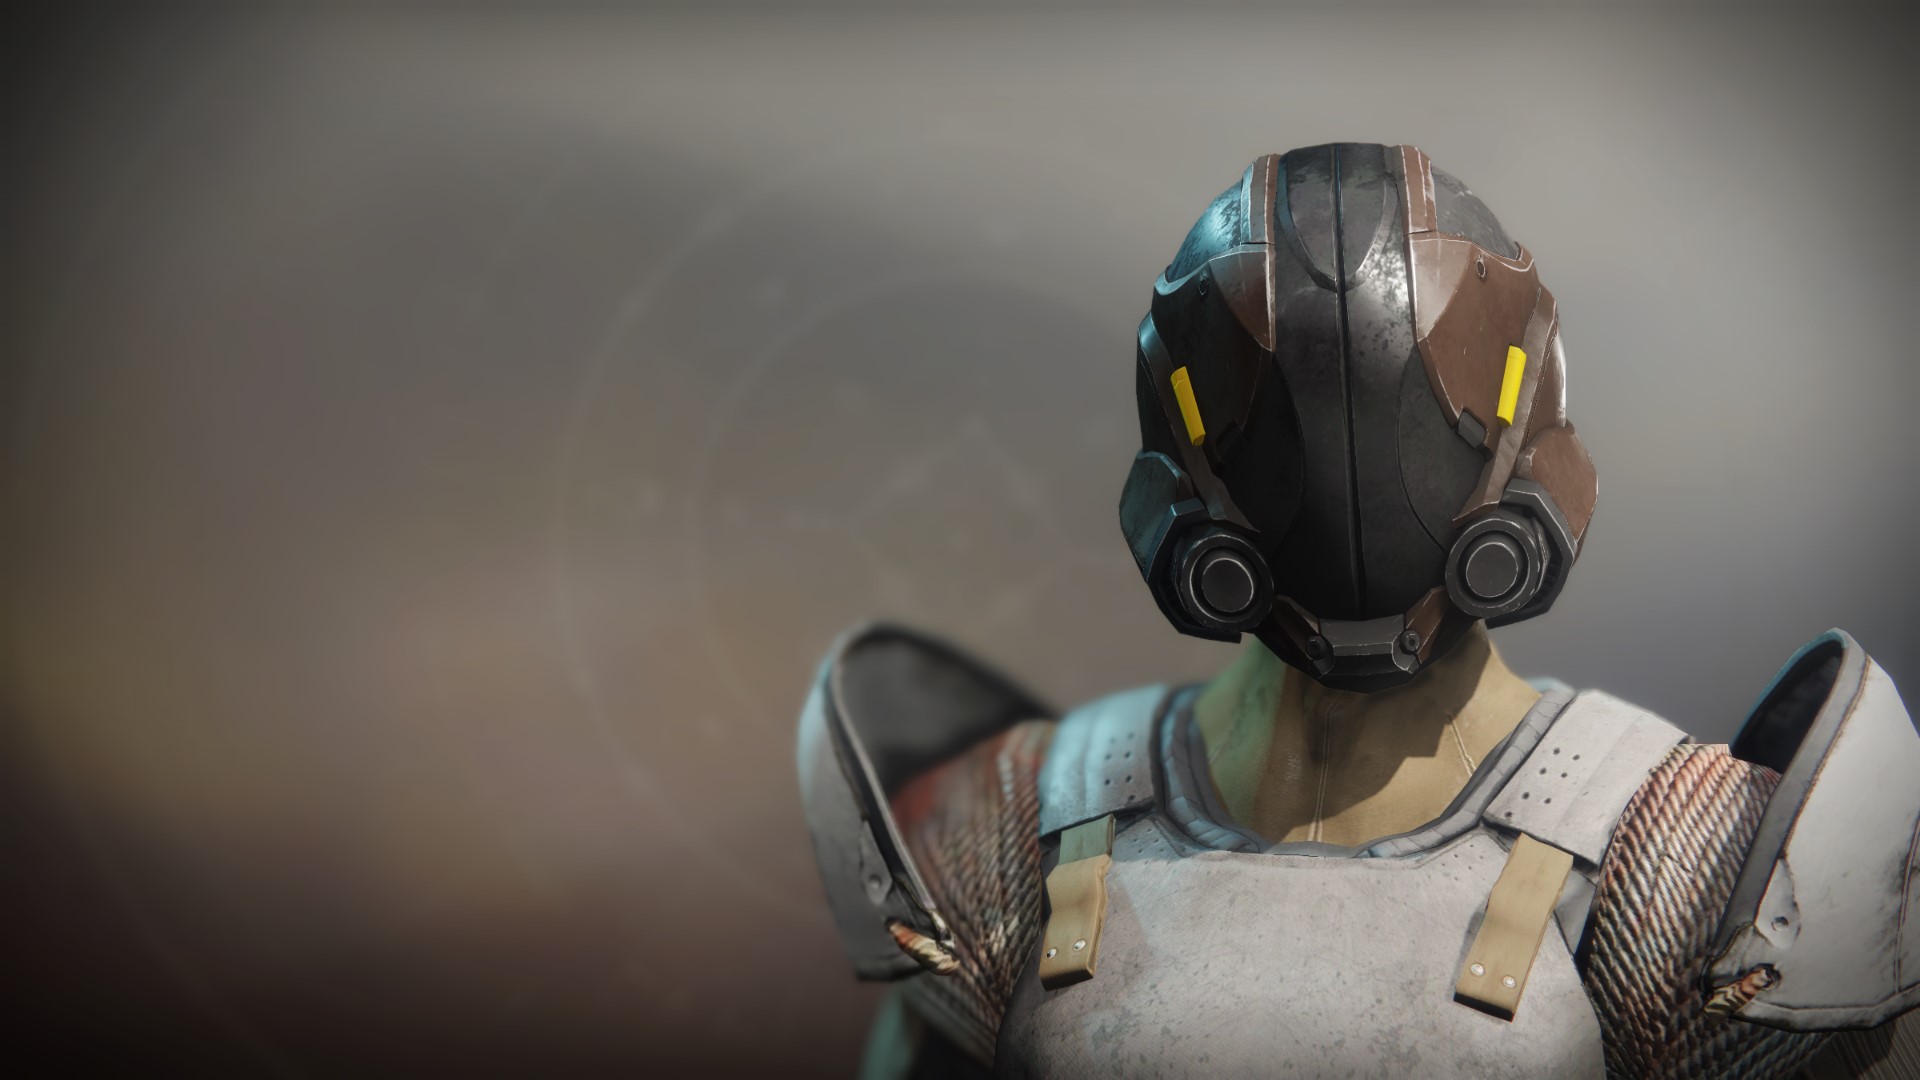 An in-game render of the Seventh Seraph Helmet.